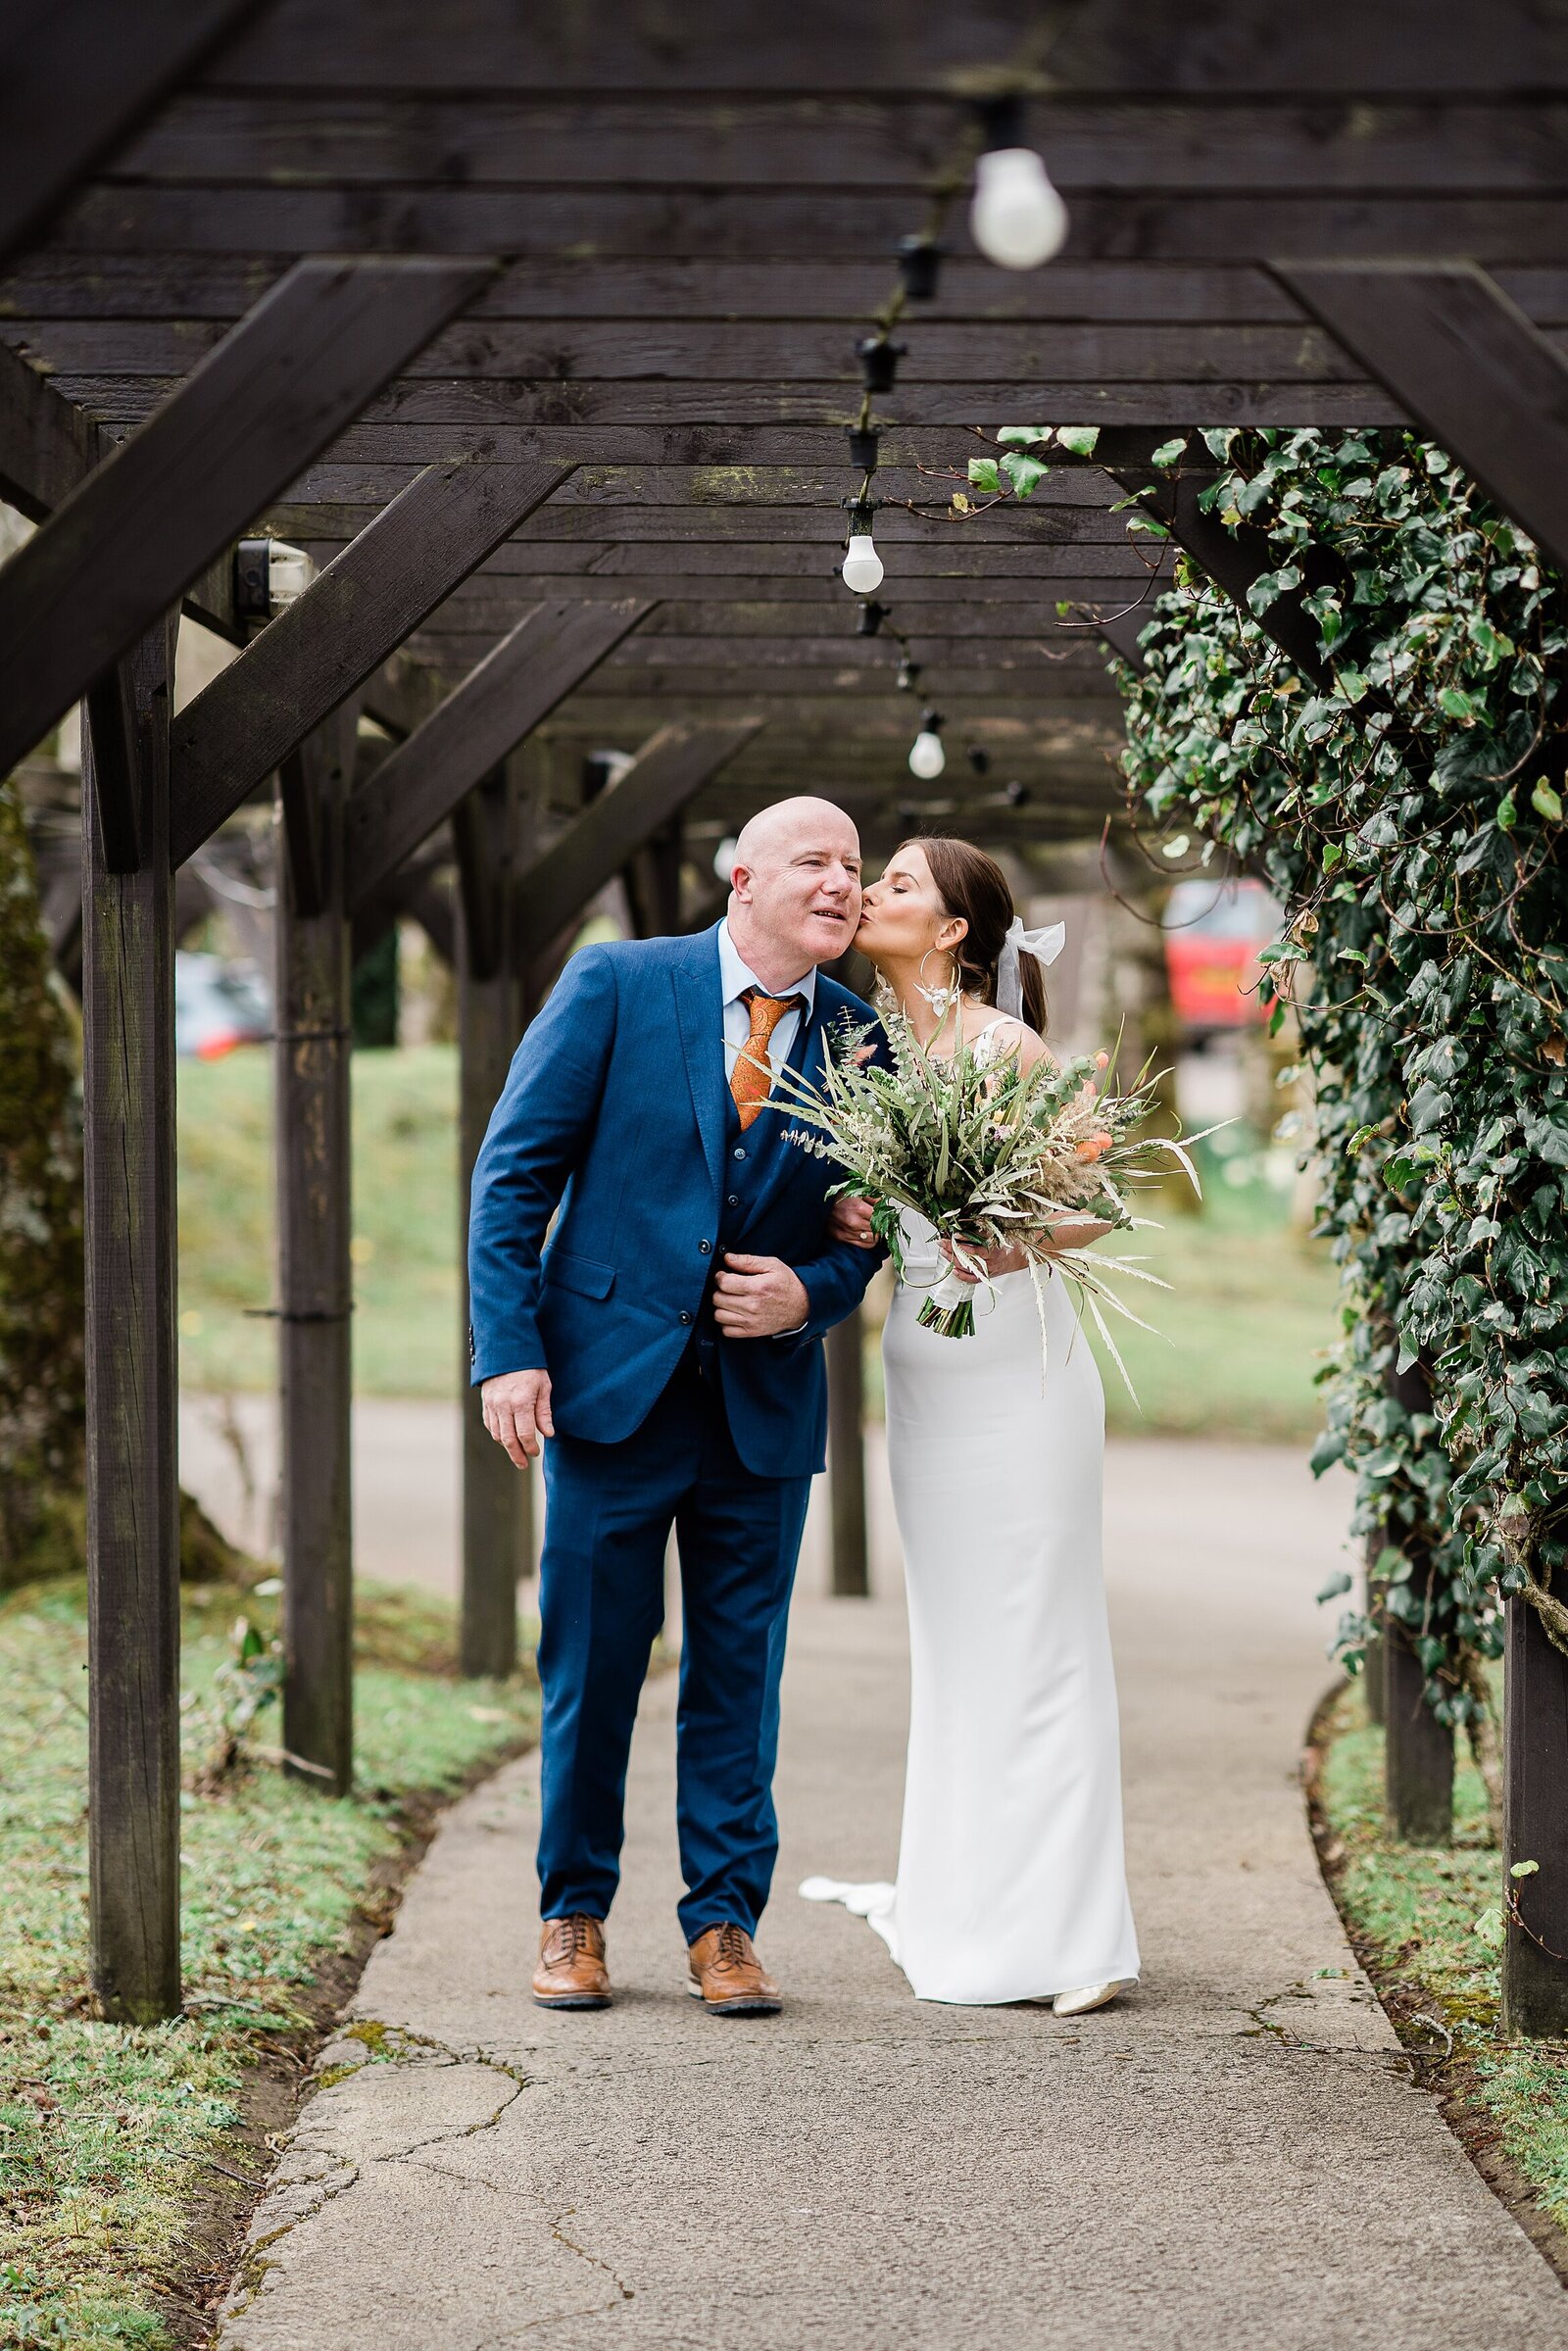 Relaxed Spring Outdoor Lusty Beg Wedding Photographer NI (65)